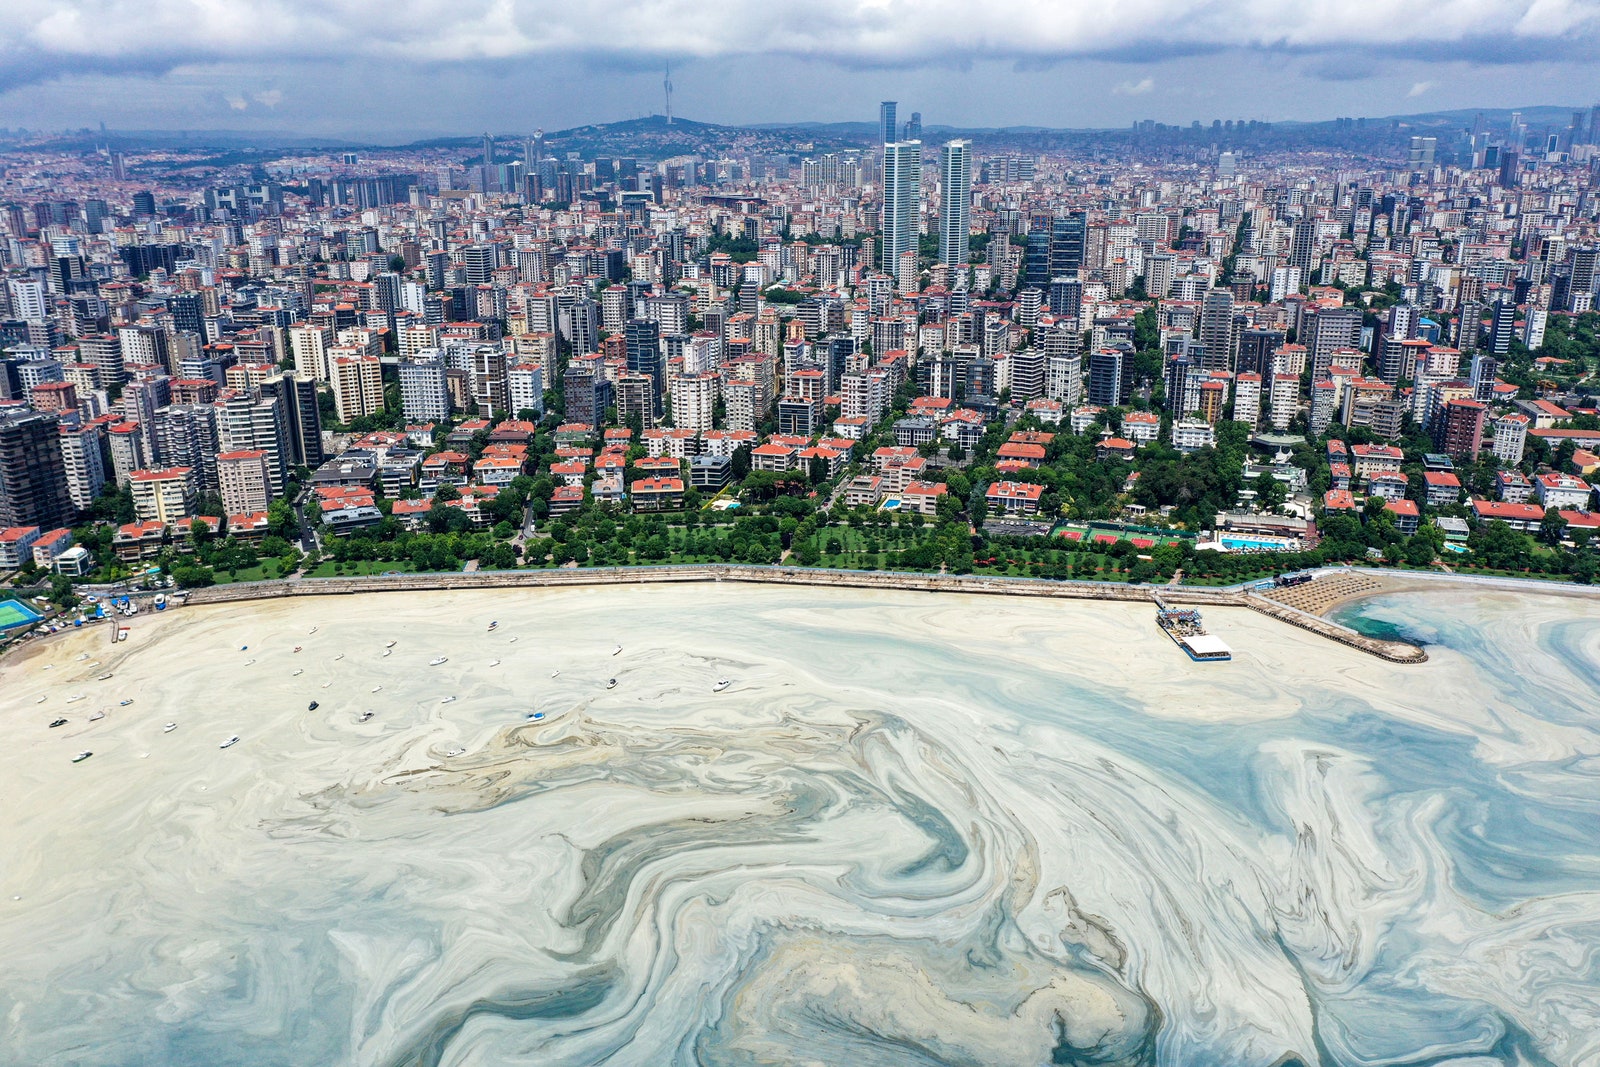 A drone photo shows an aerial view of increased mucilage level at Caddebostan shore in Istanbul Turkey on June 15 2021.